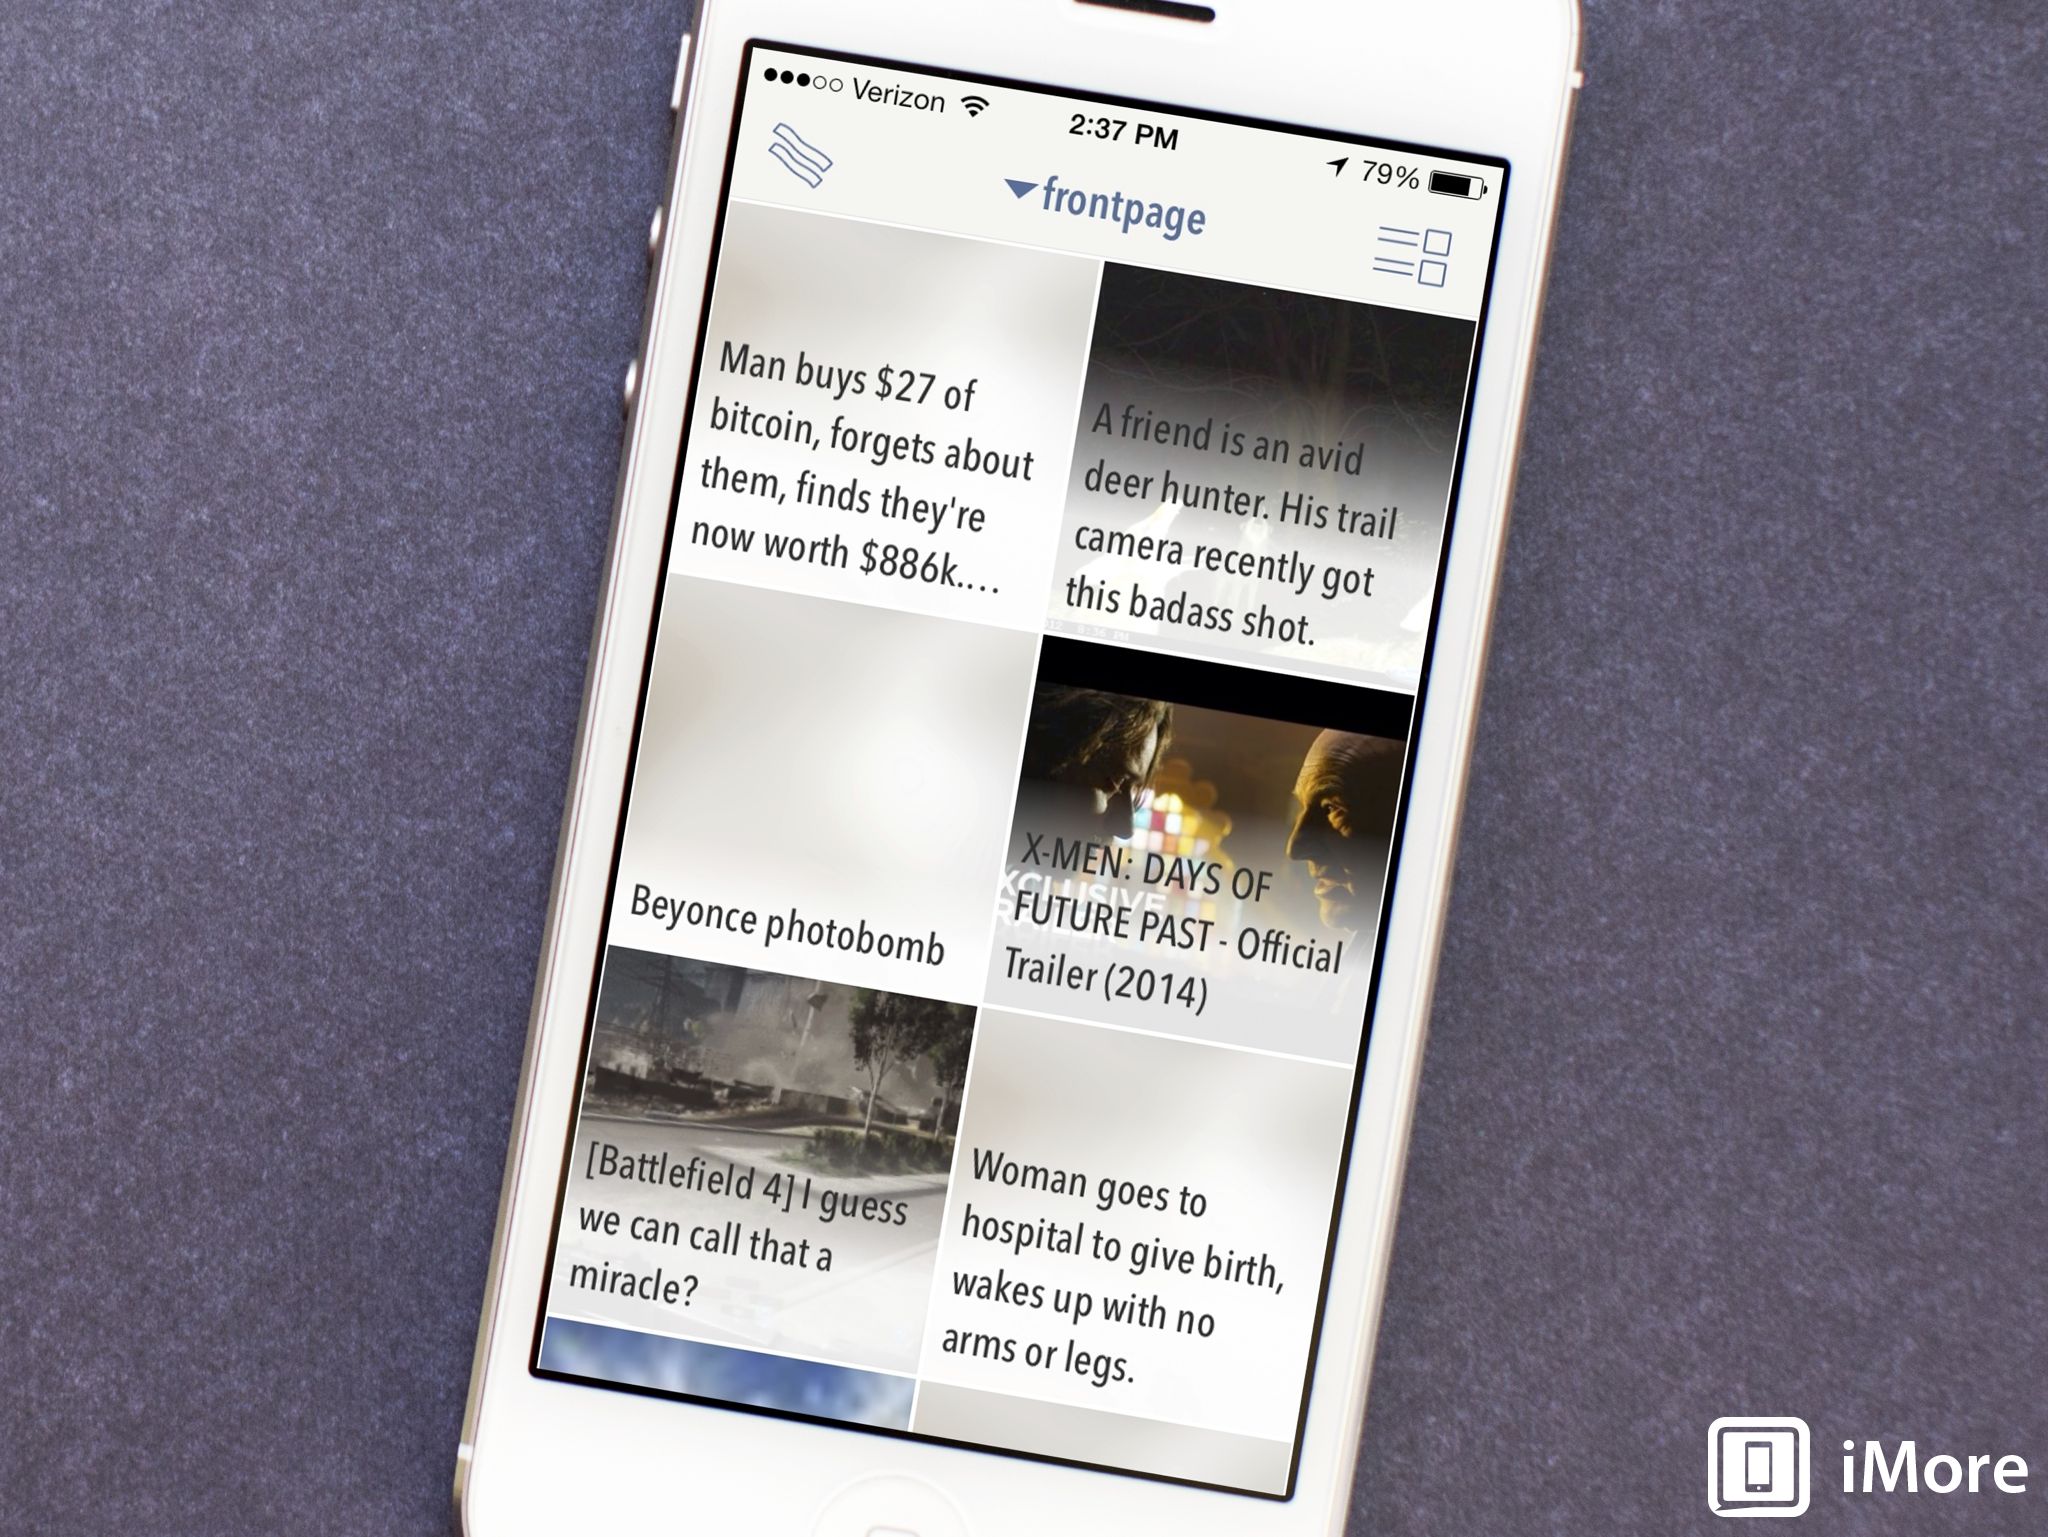 Popular Reddit app BaconReader makes its way to the iPhone